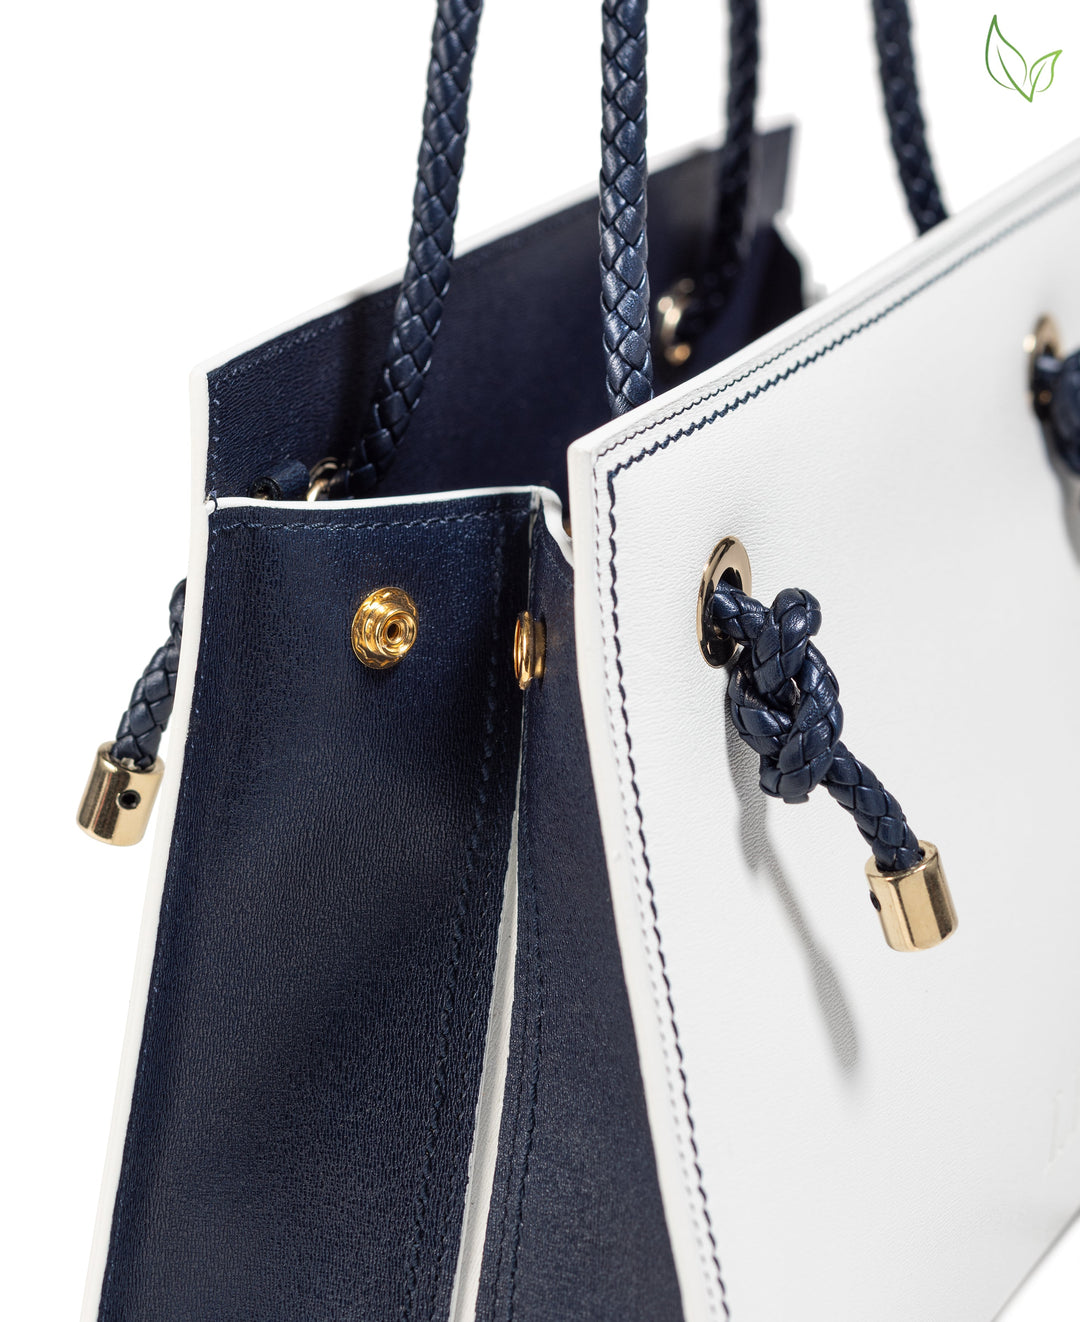 Close-up of a stylish white and navy blue handbag with braided handles and gold accents